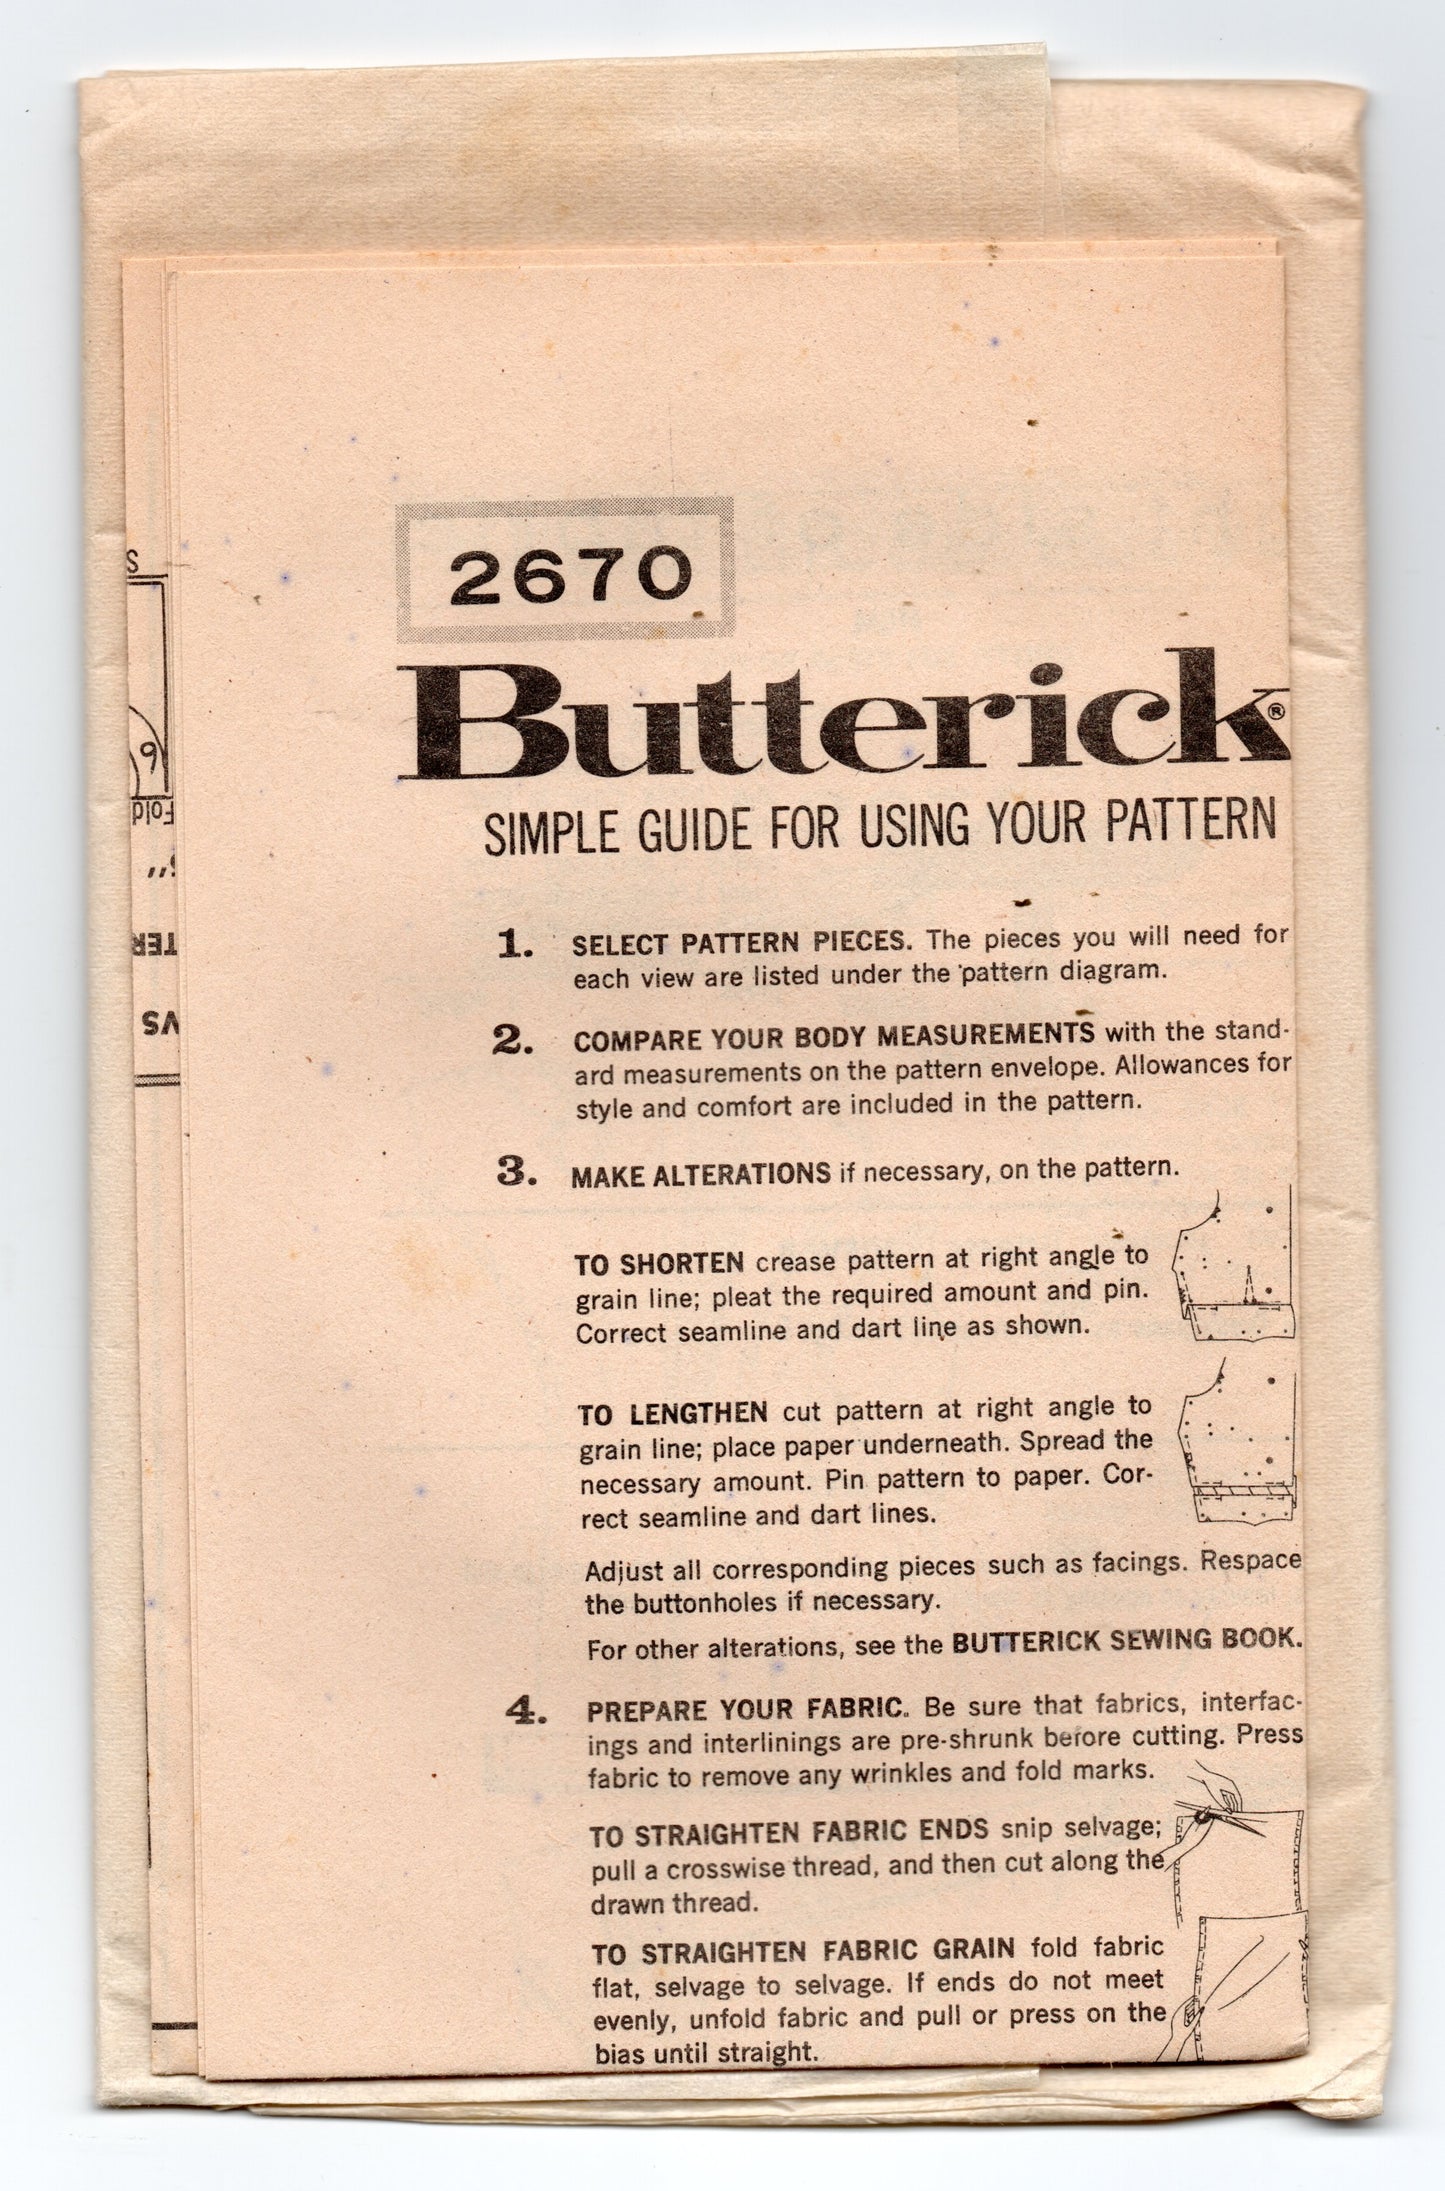 Butterick 2670 Womens EASY Panelled Sheath Dress 1960s Vintage Sewing Pattern Size 12 Bust 32 inches UNUSED Factory Folded